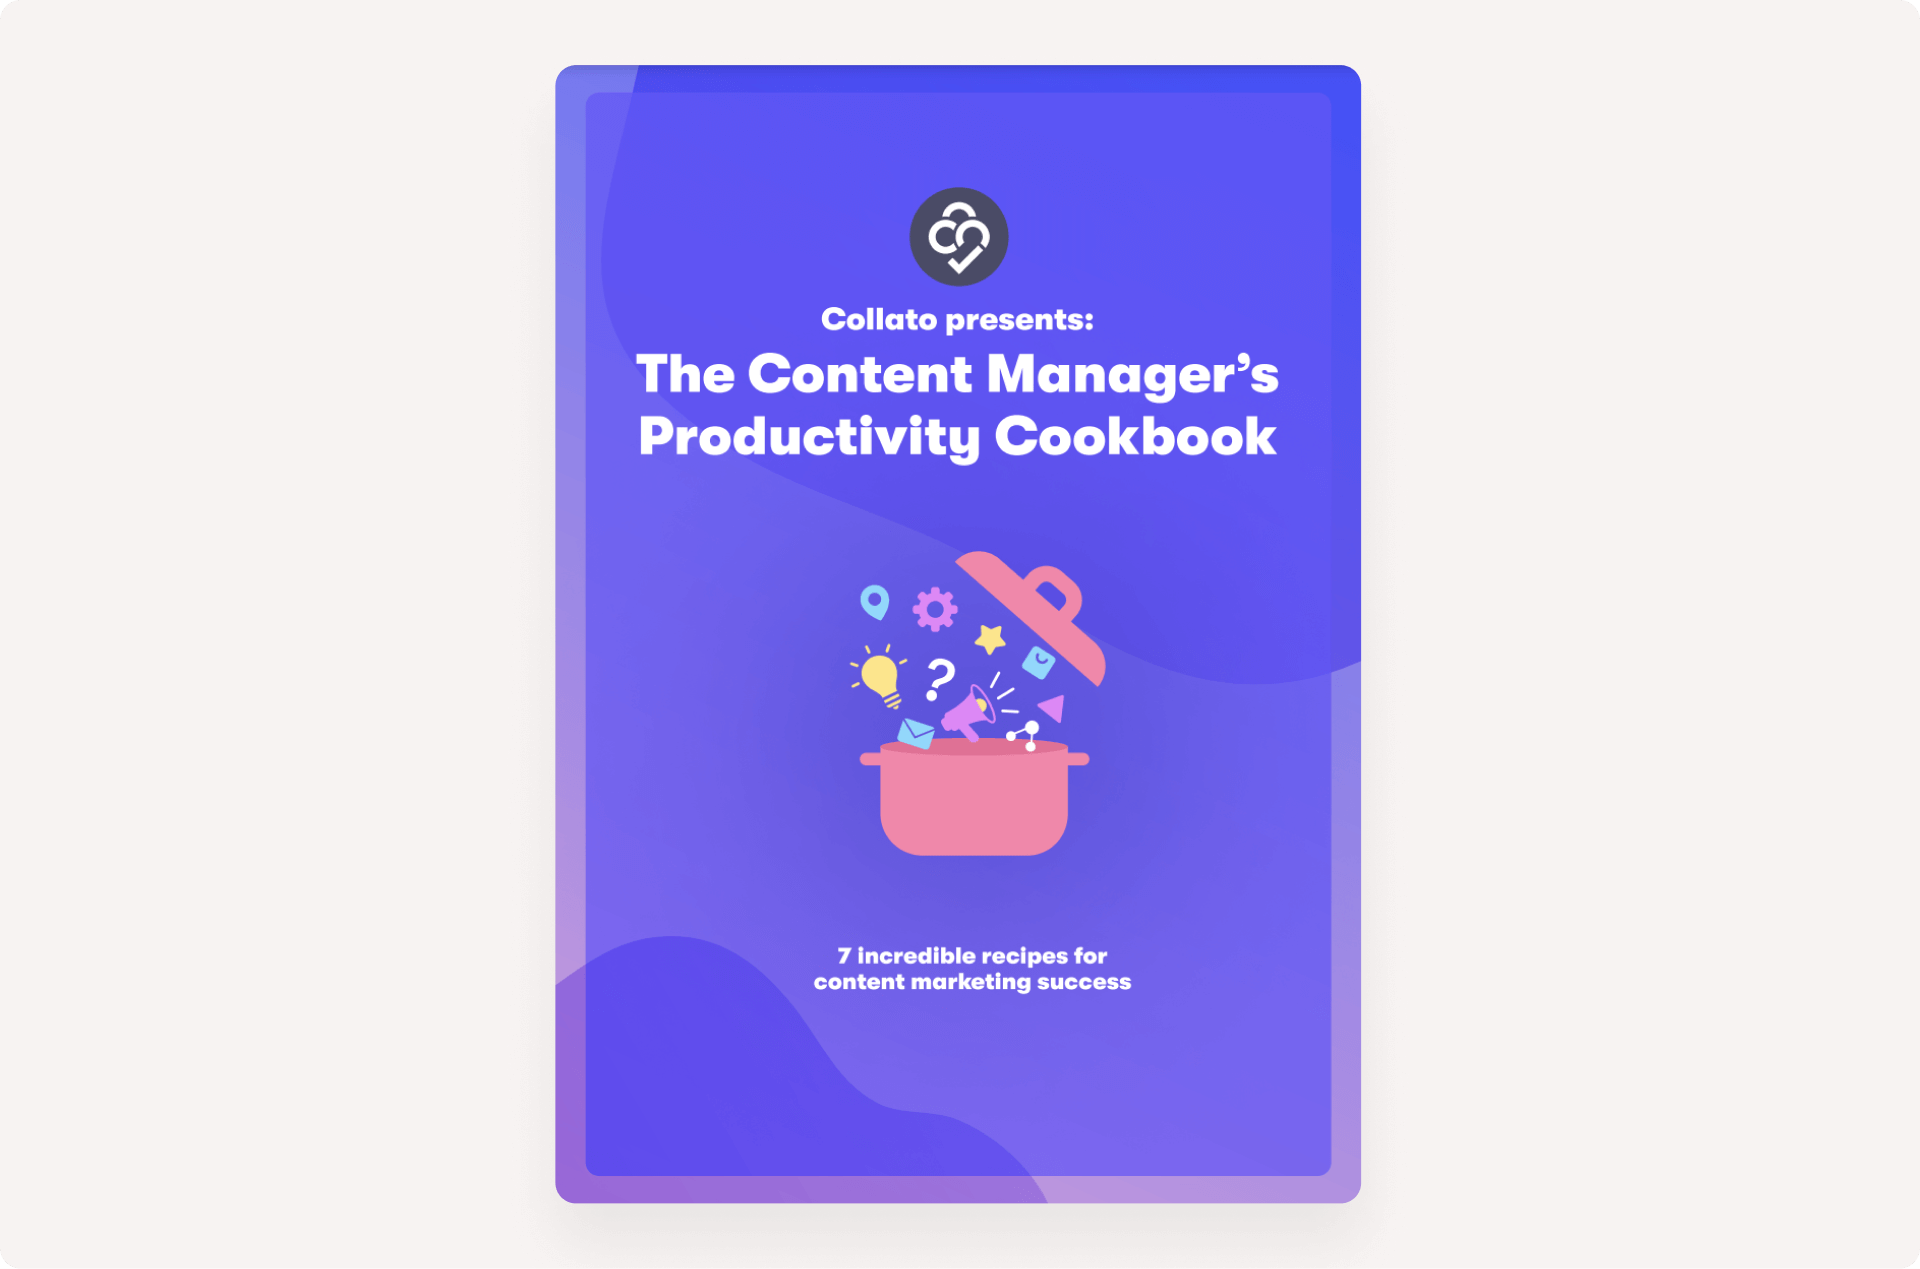 The content manager's productivity cookbook